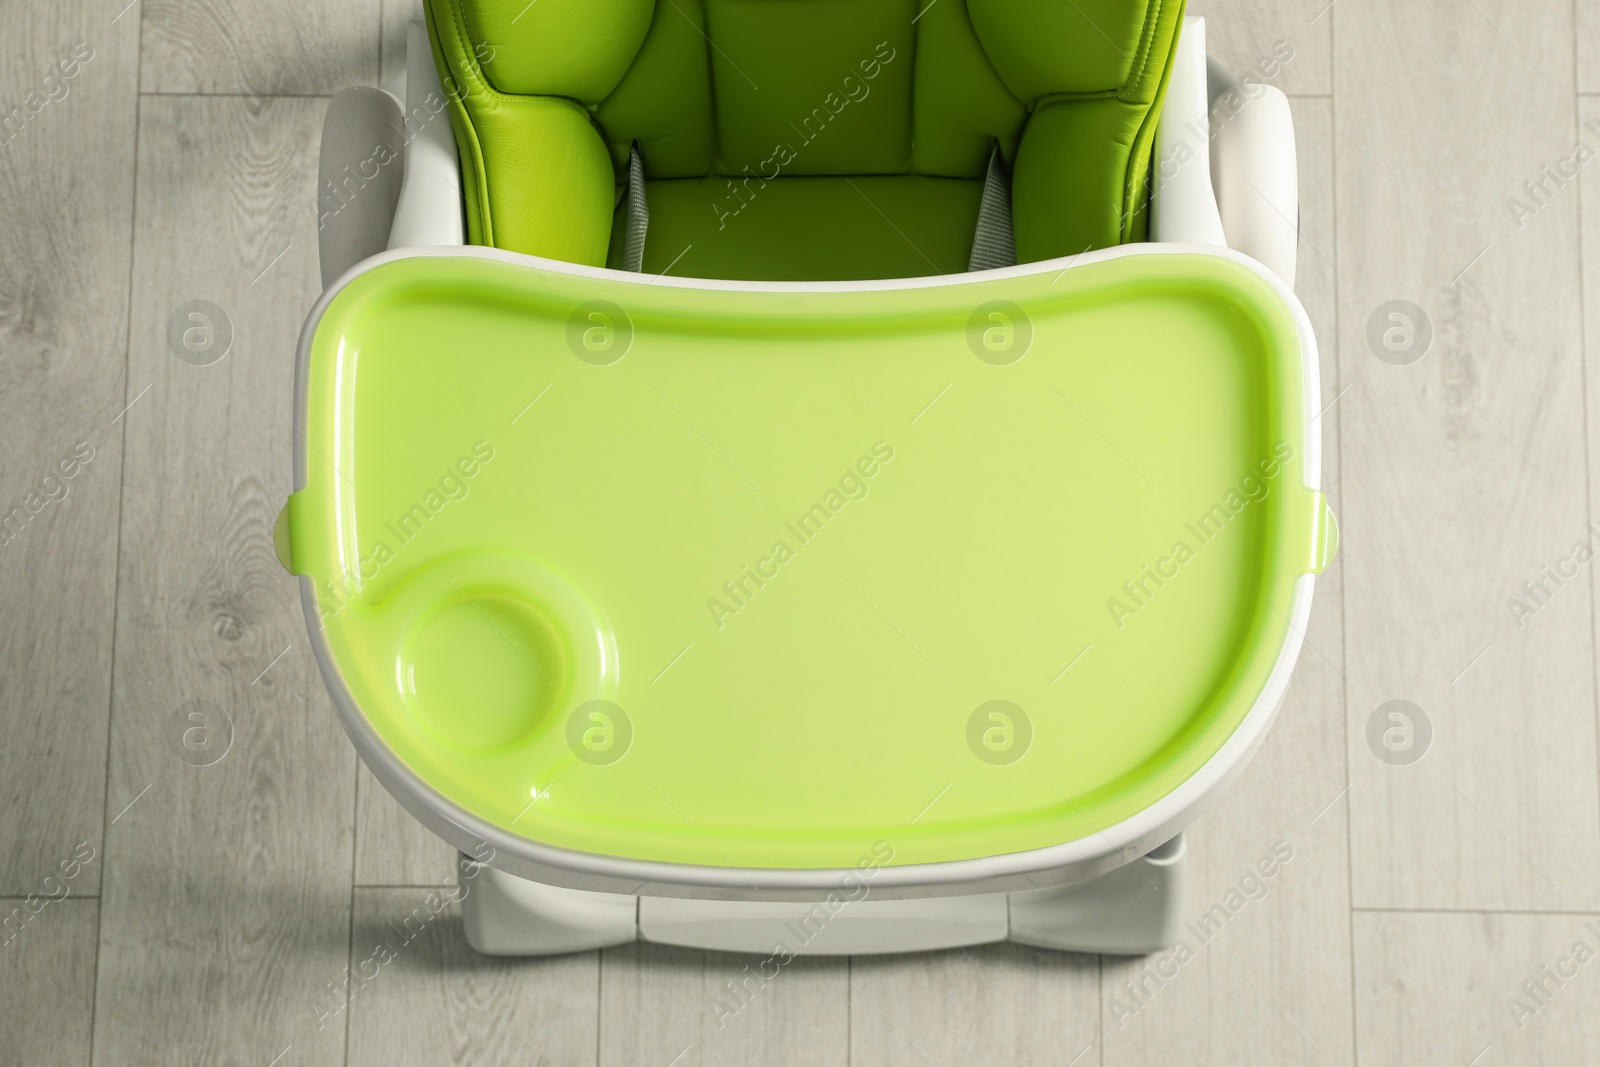 Photo of Green baby high chair indoors, top view